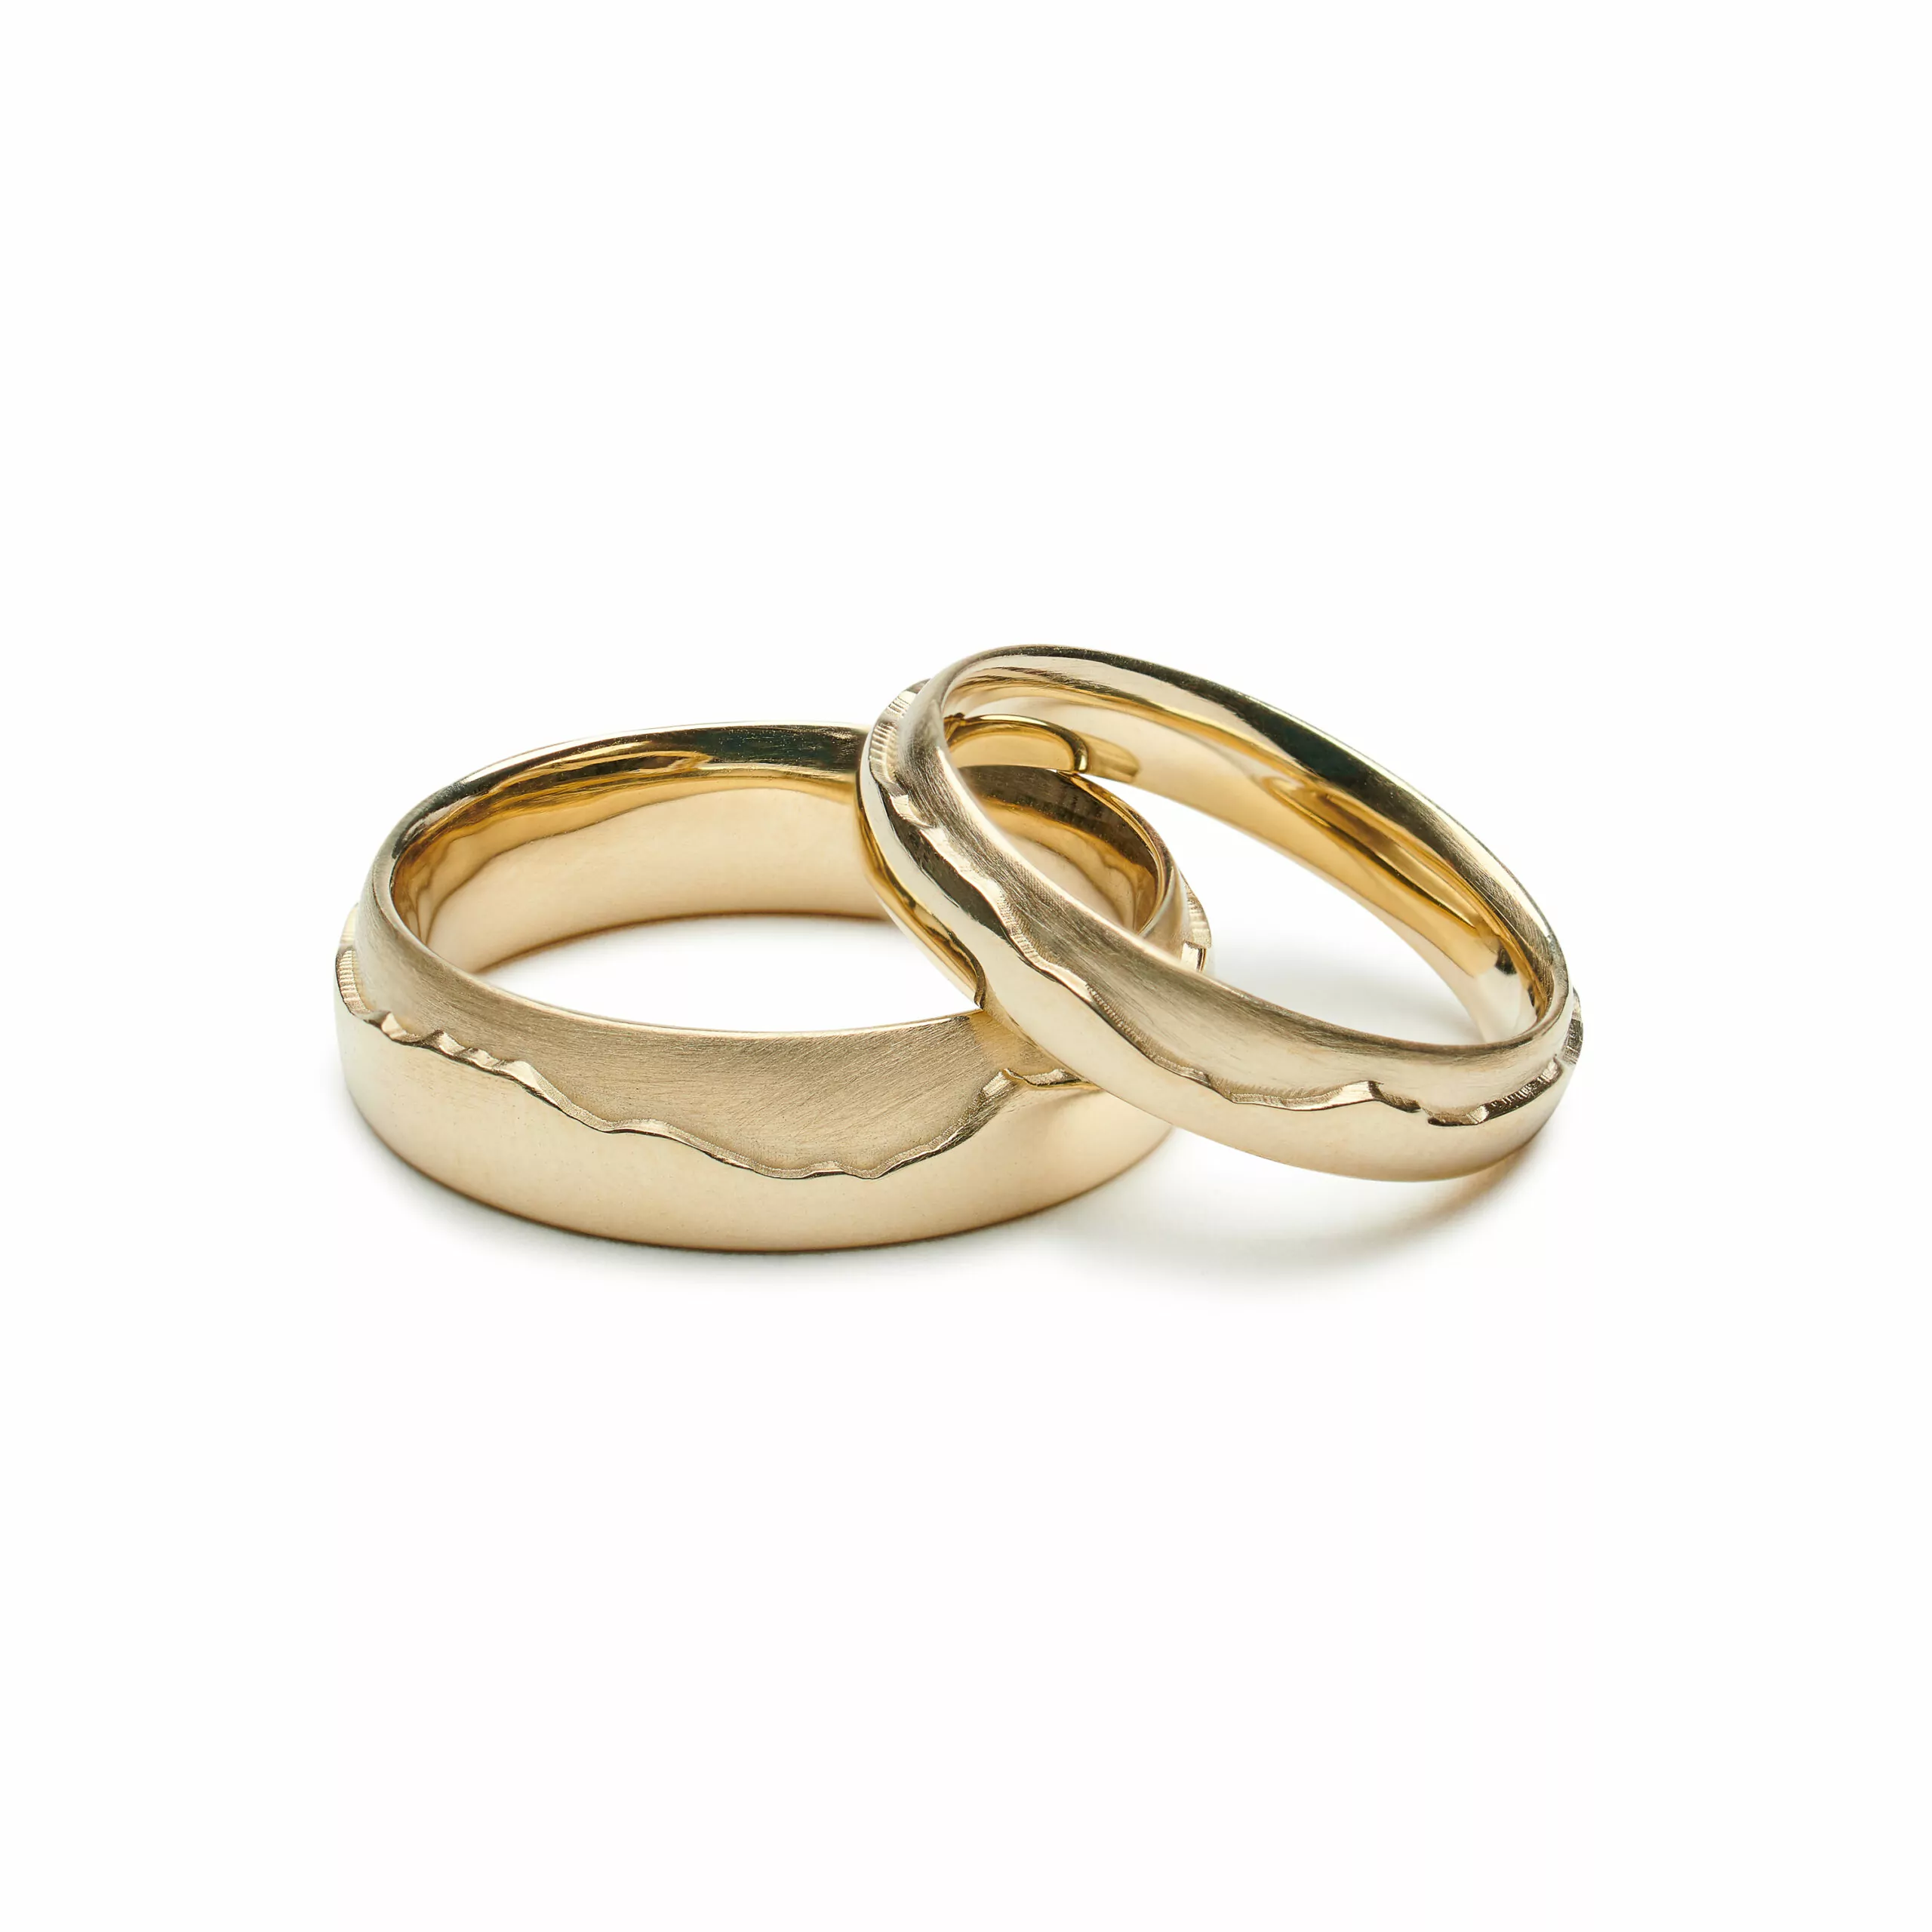 24K Gold Hot Wedding Ring Set Invisible Setting Top Quality | eBay